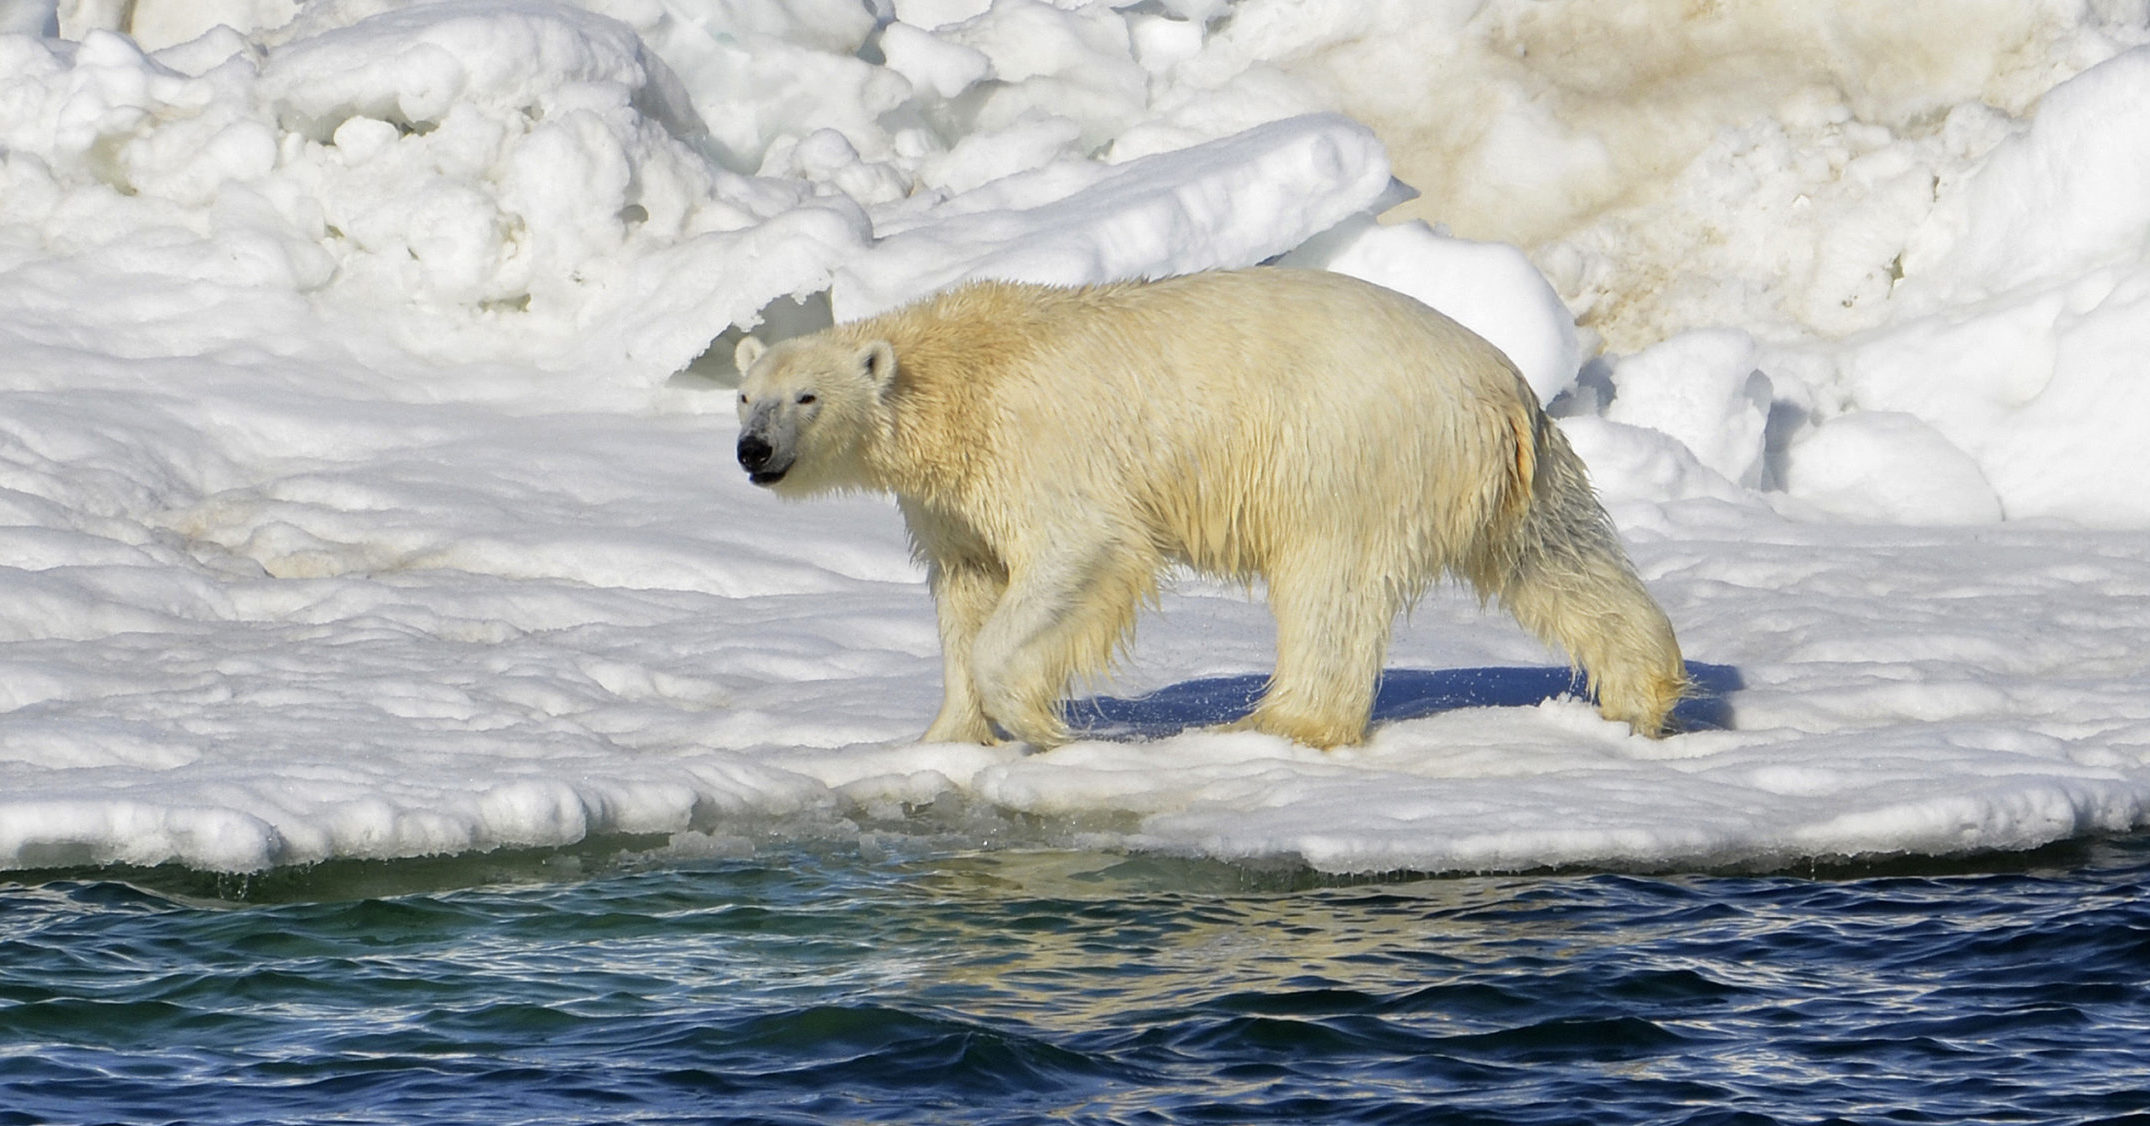 A polar bear dries off after taking a swim in the Chukchi Sea in Alaska on June 15, 2014.